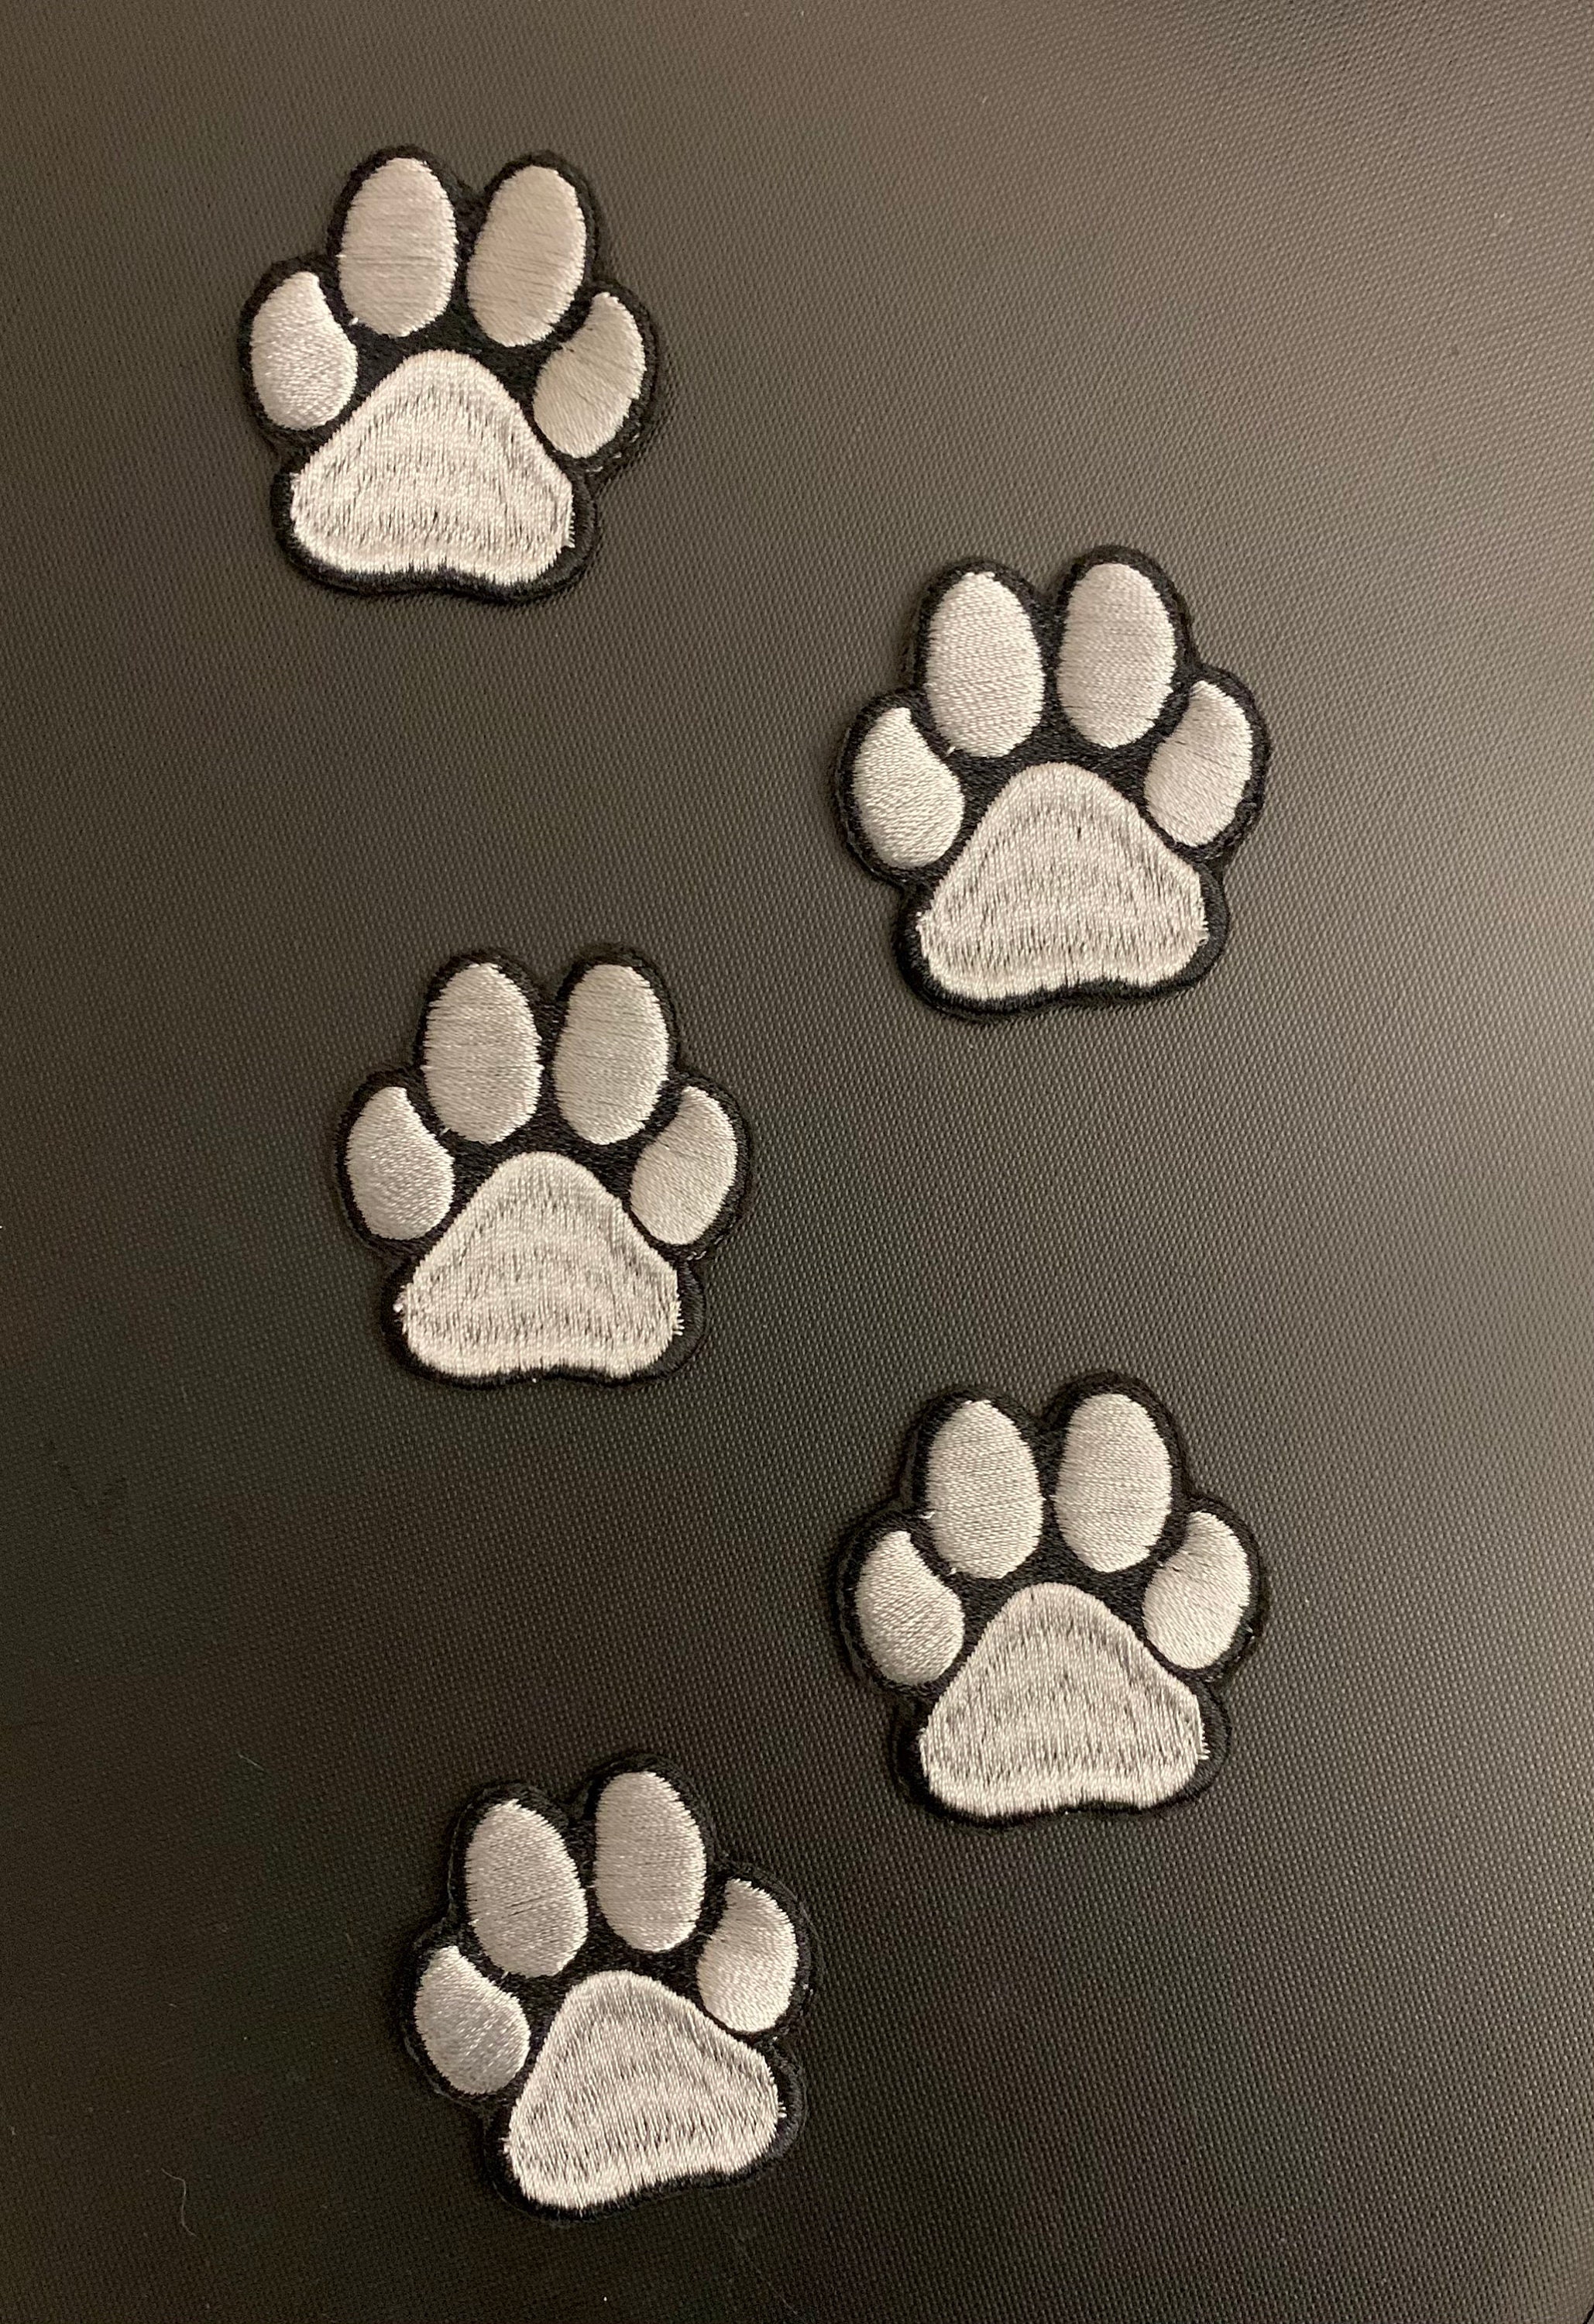 Iron on paw patches or sew on Paw patches paw print patches | Etsy